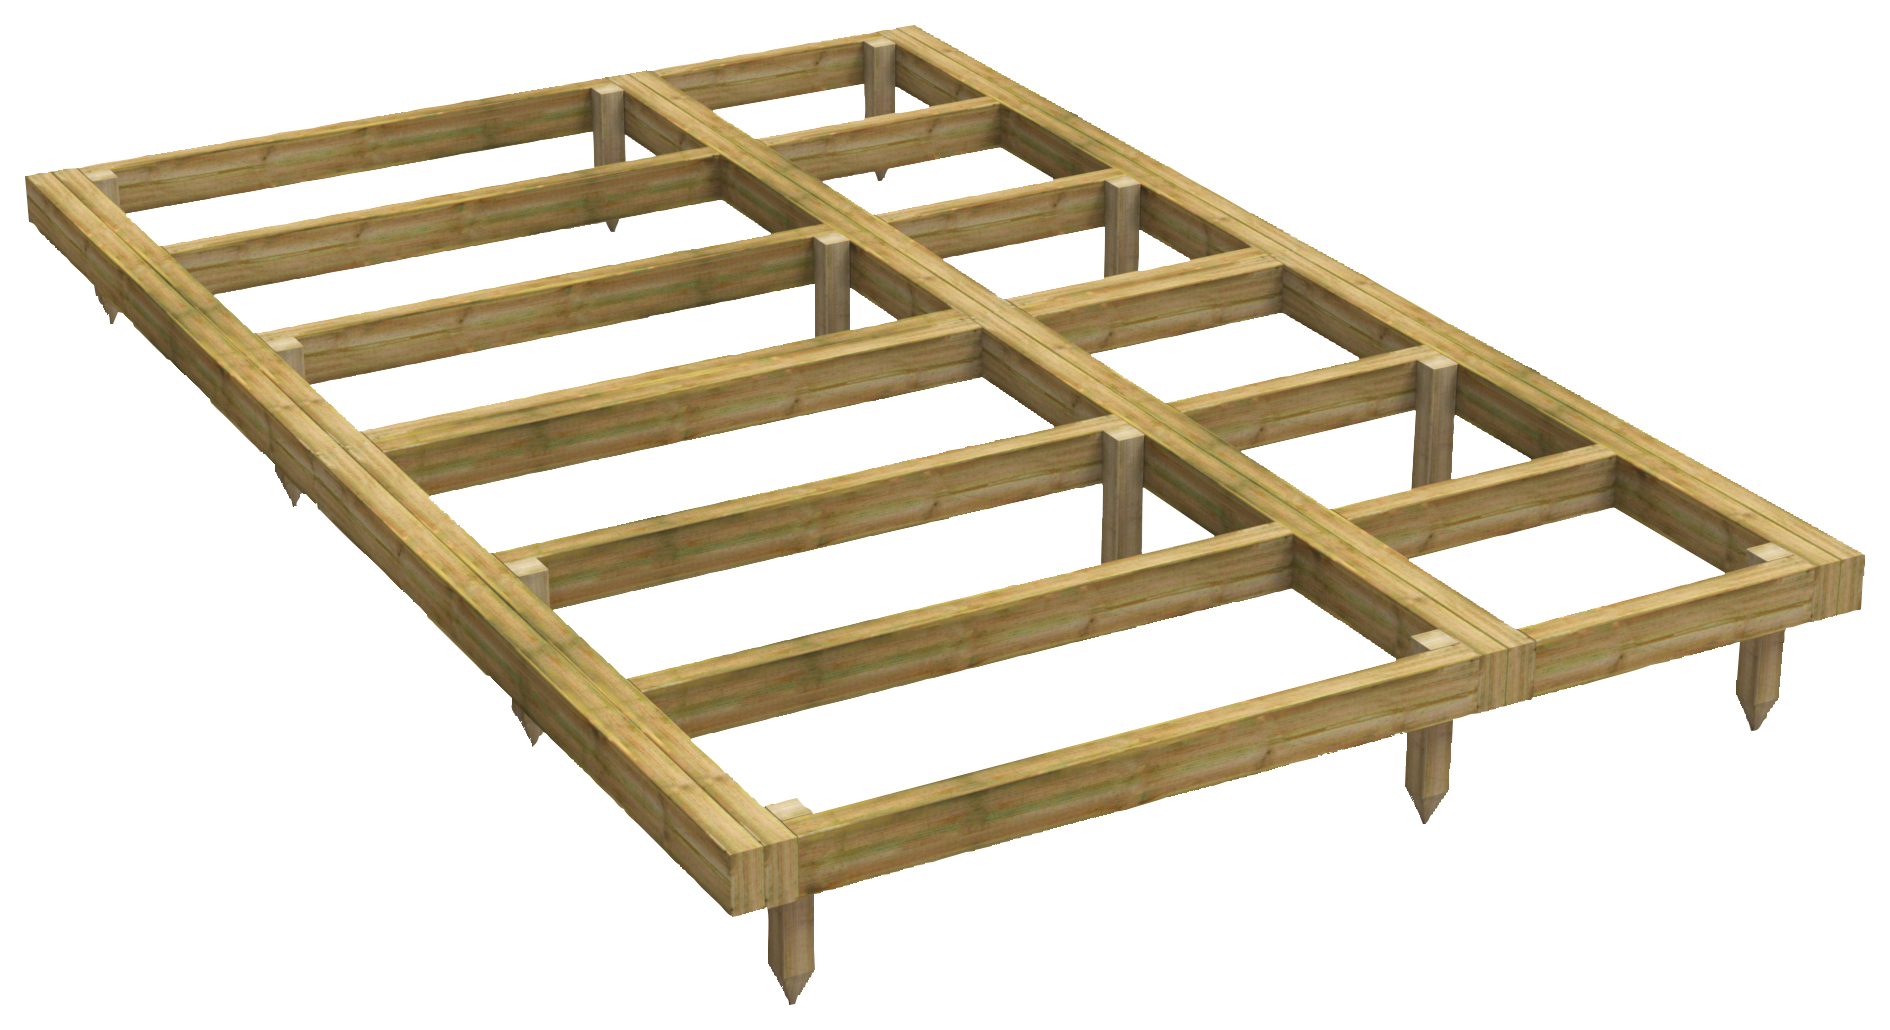 Power Sheds Pressure Treated Garden Building Base Kit - 6 x 10ft